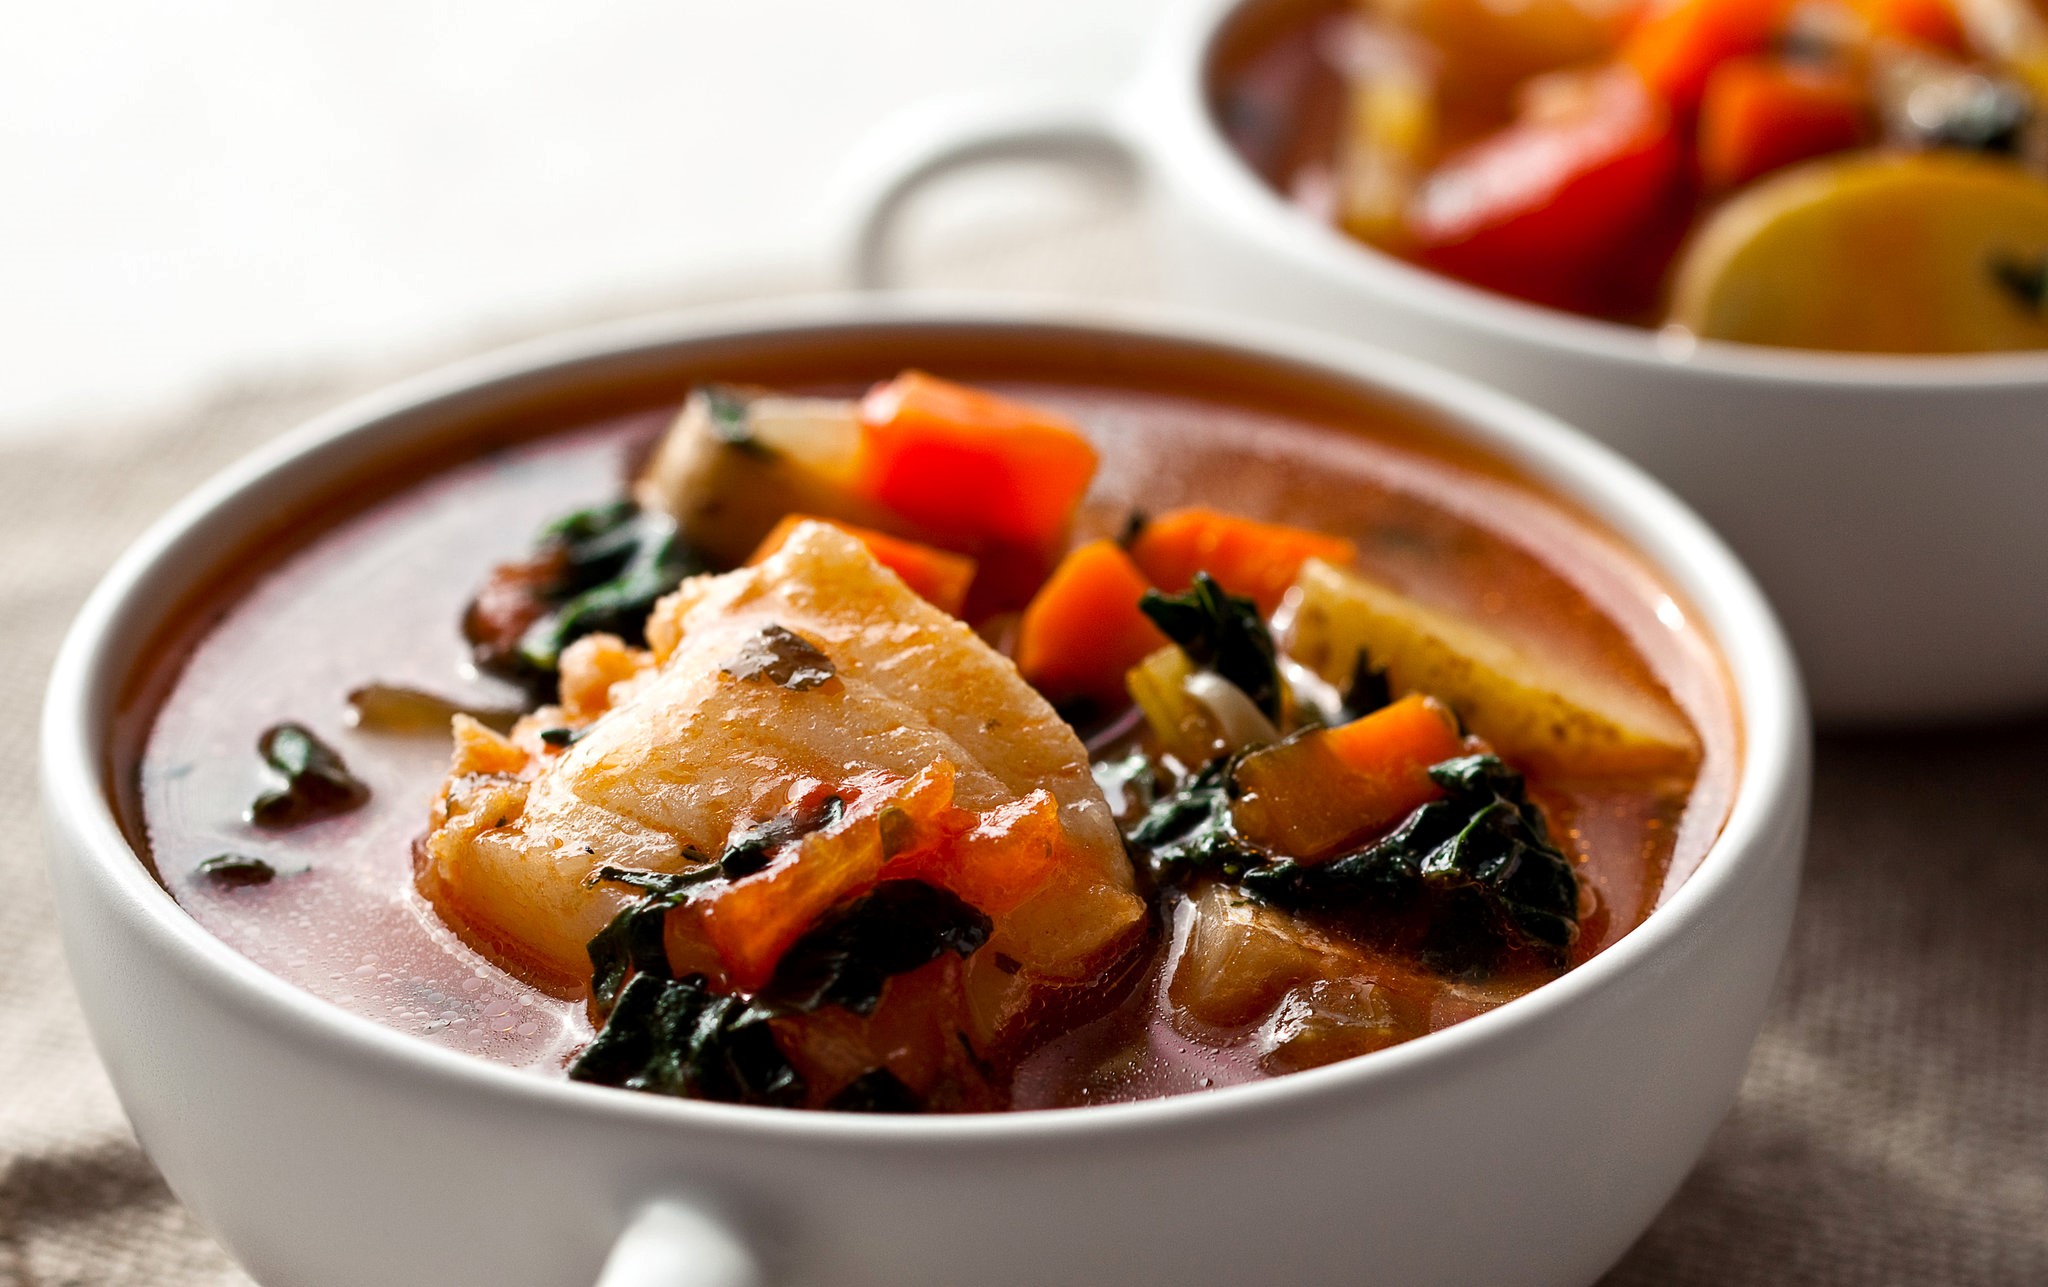 American Mediterranean Fish Chowder With Potatoes and Black Kale Recipe Appetizer